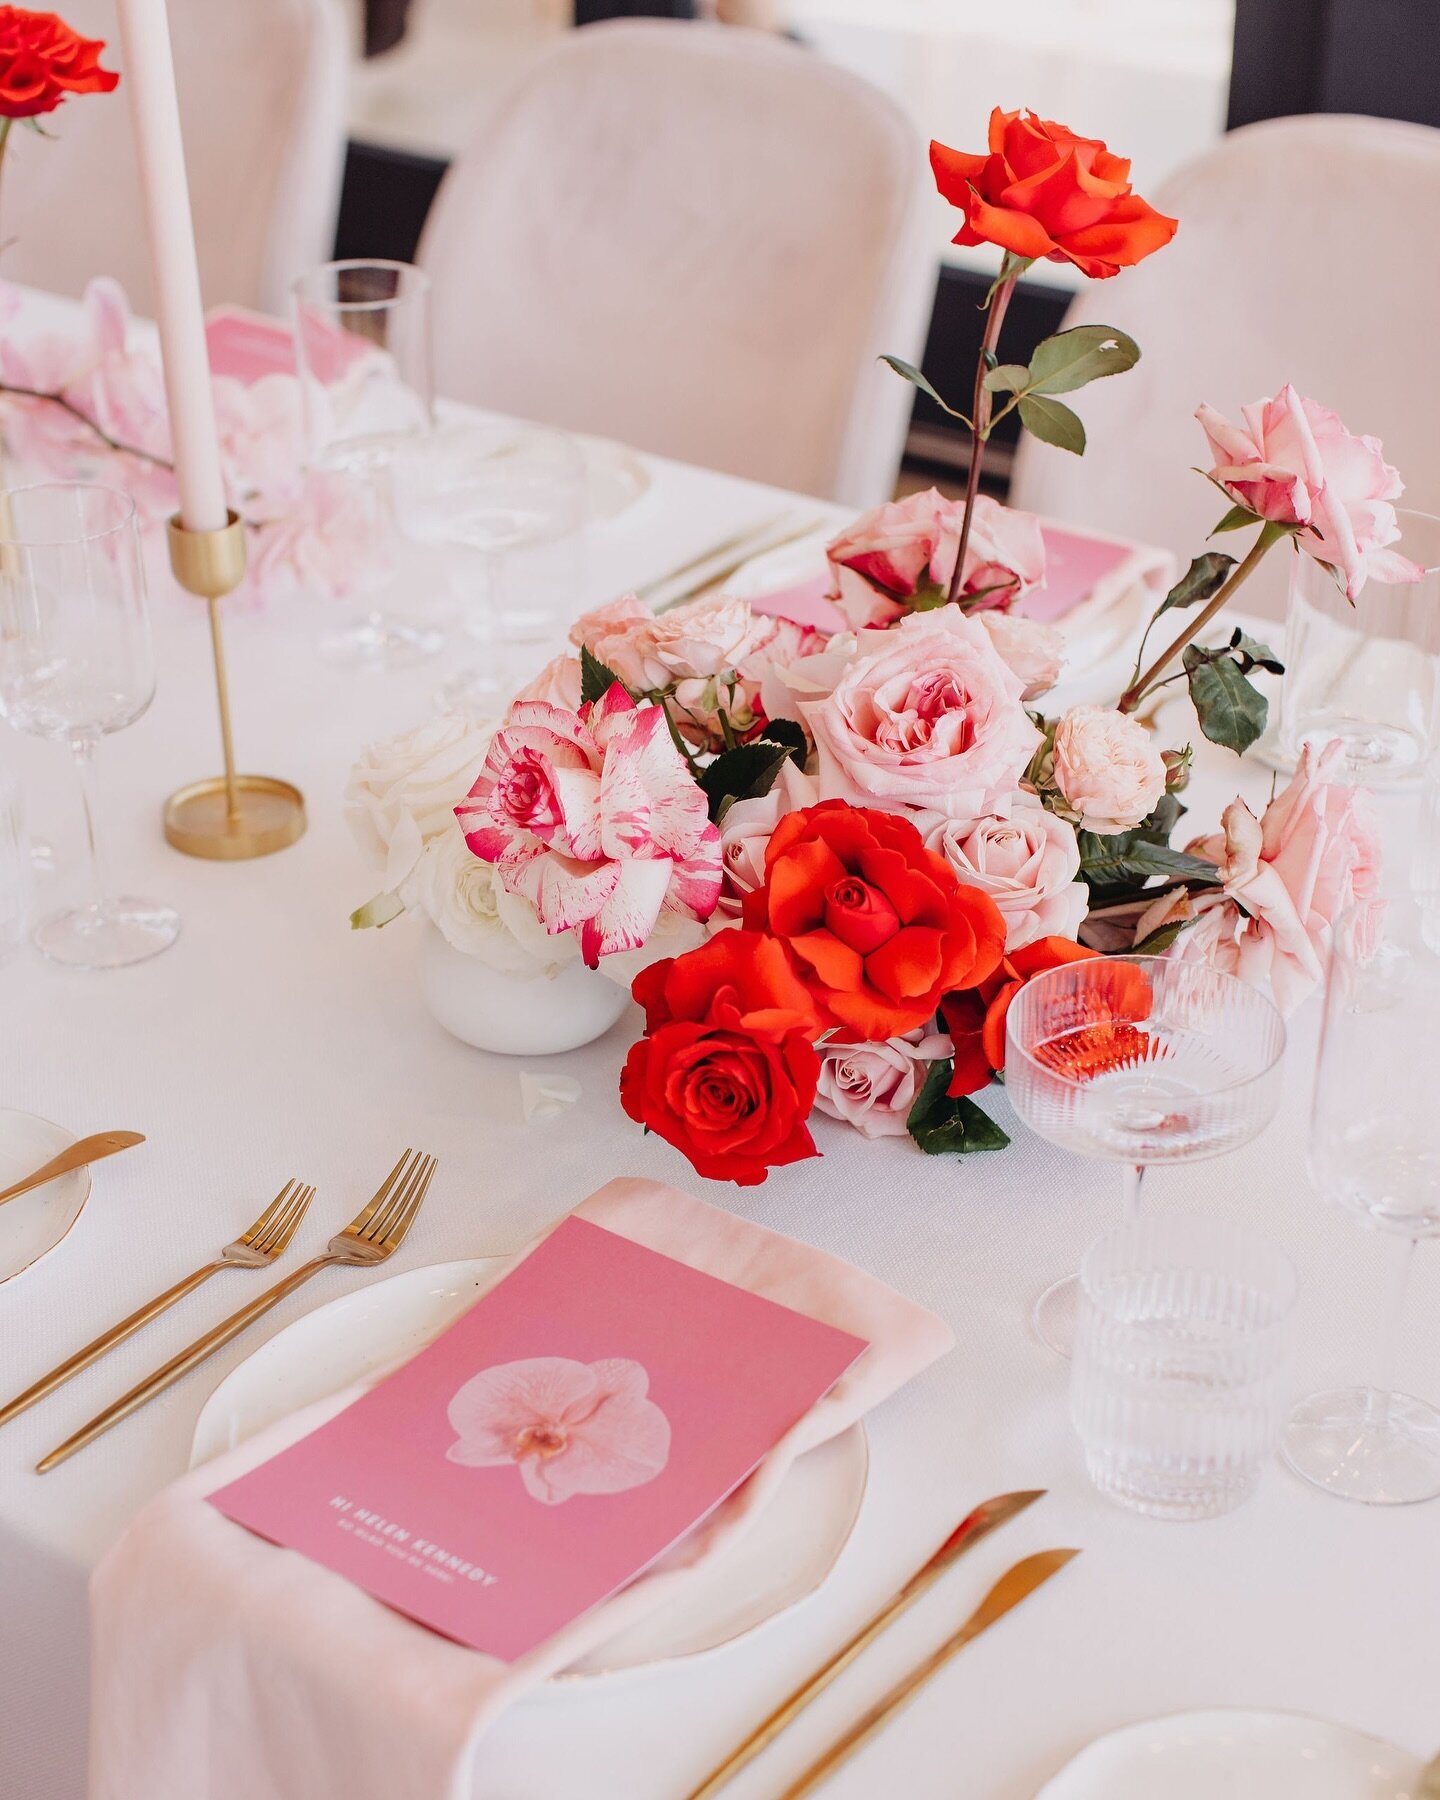 Details 💝

A pink phaelenopsis orchid on every menu&hellip; Tying in with the signage throughout the venue, it&rsquo;s the little touches that make all the difference when it comes to private events 🎀

&bull;

Image by @ridhwaanmoolla 

#whiteevent